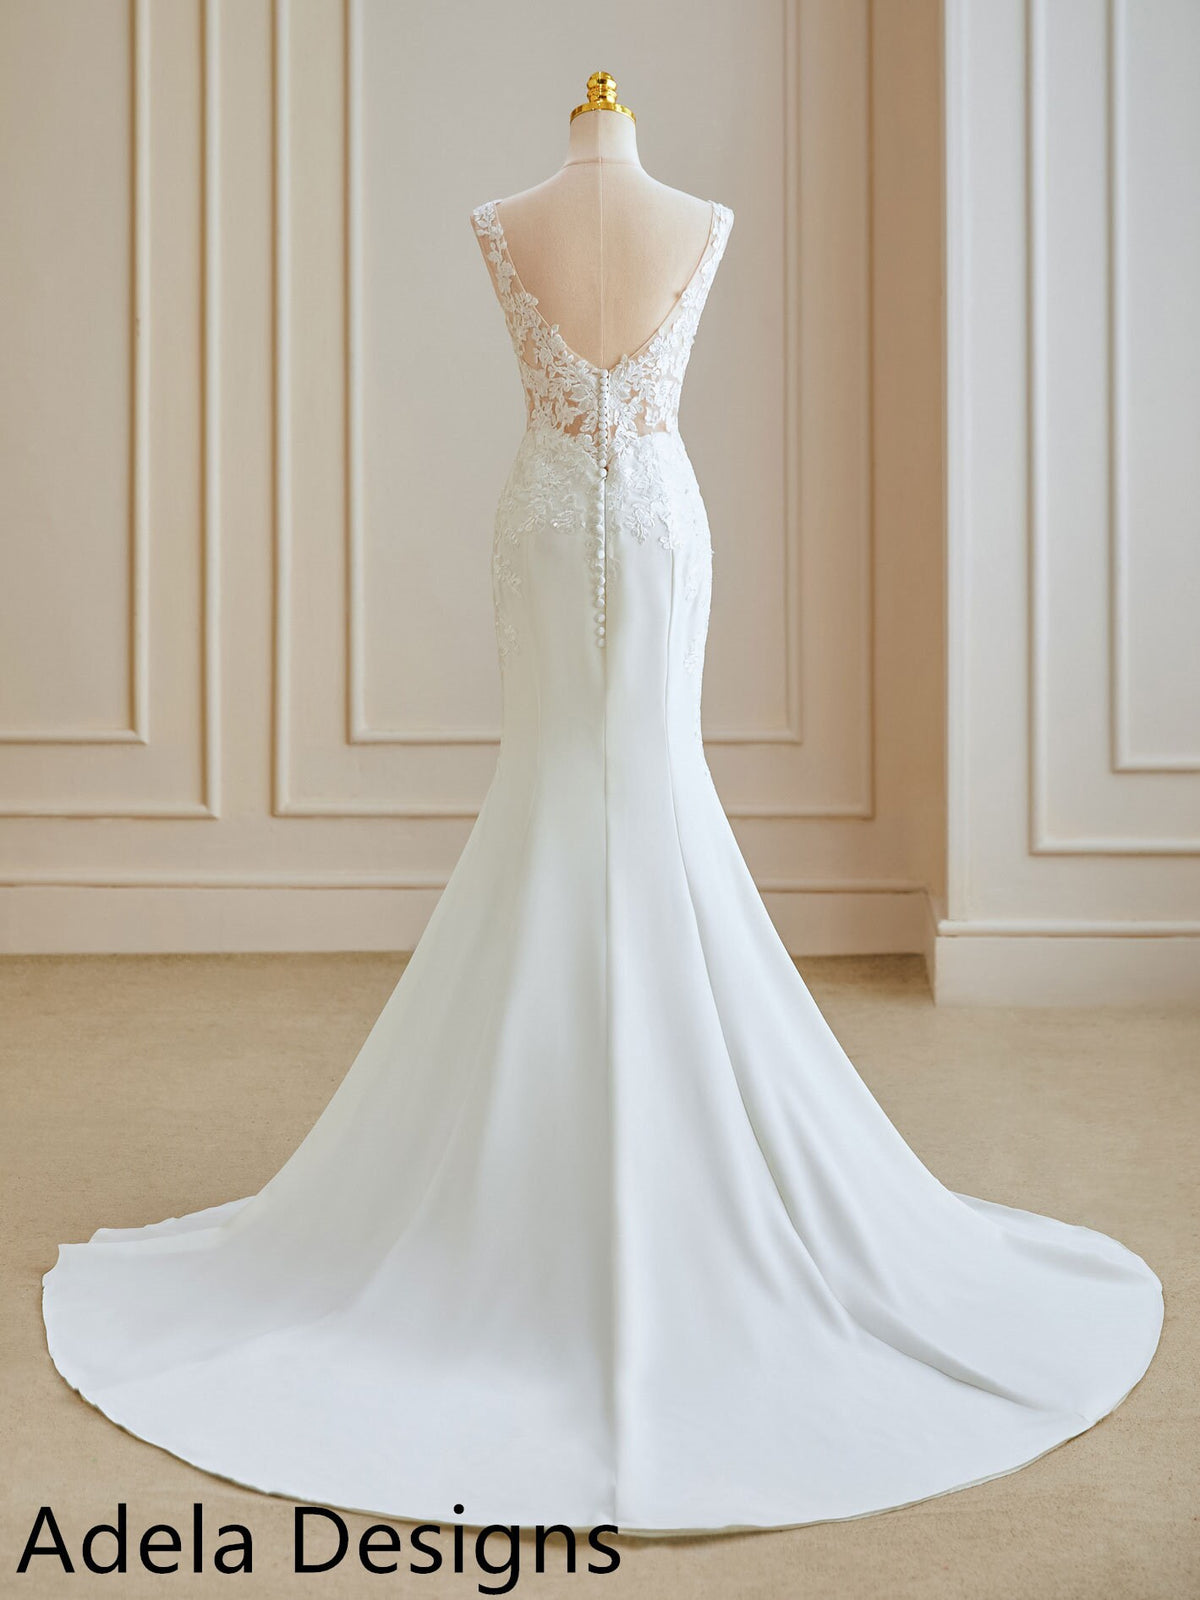 Mermaid Crepe Wedding Dress Bridal Gown Sweetheart Split Neckline Sleeveless with Straps Low Open Back Fit and Flare